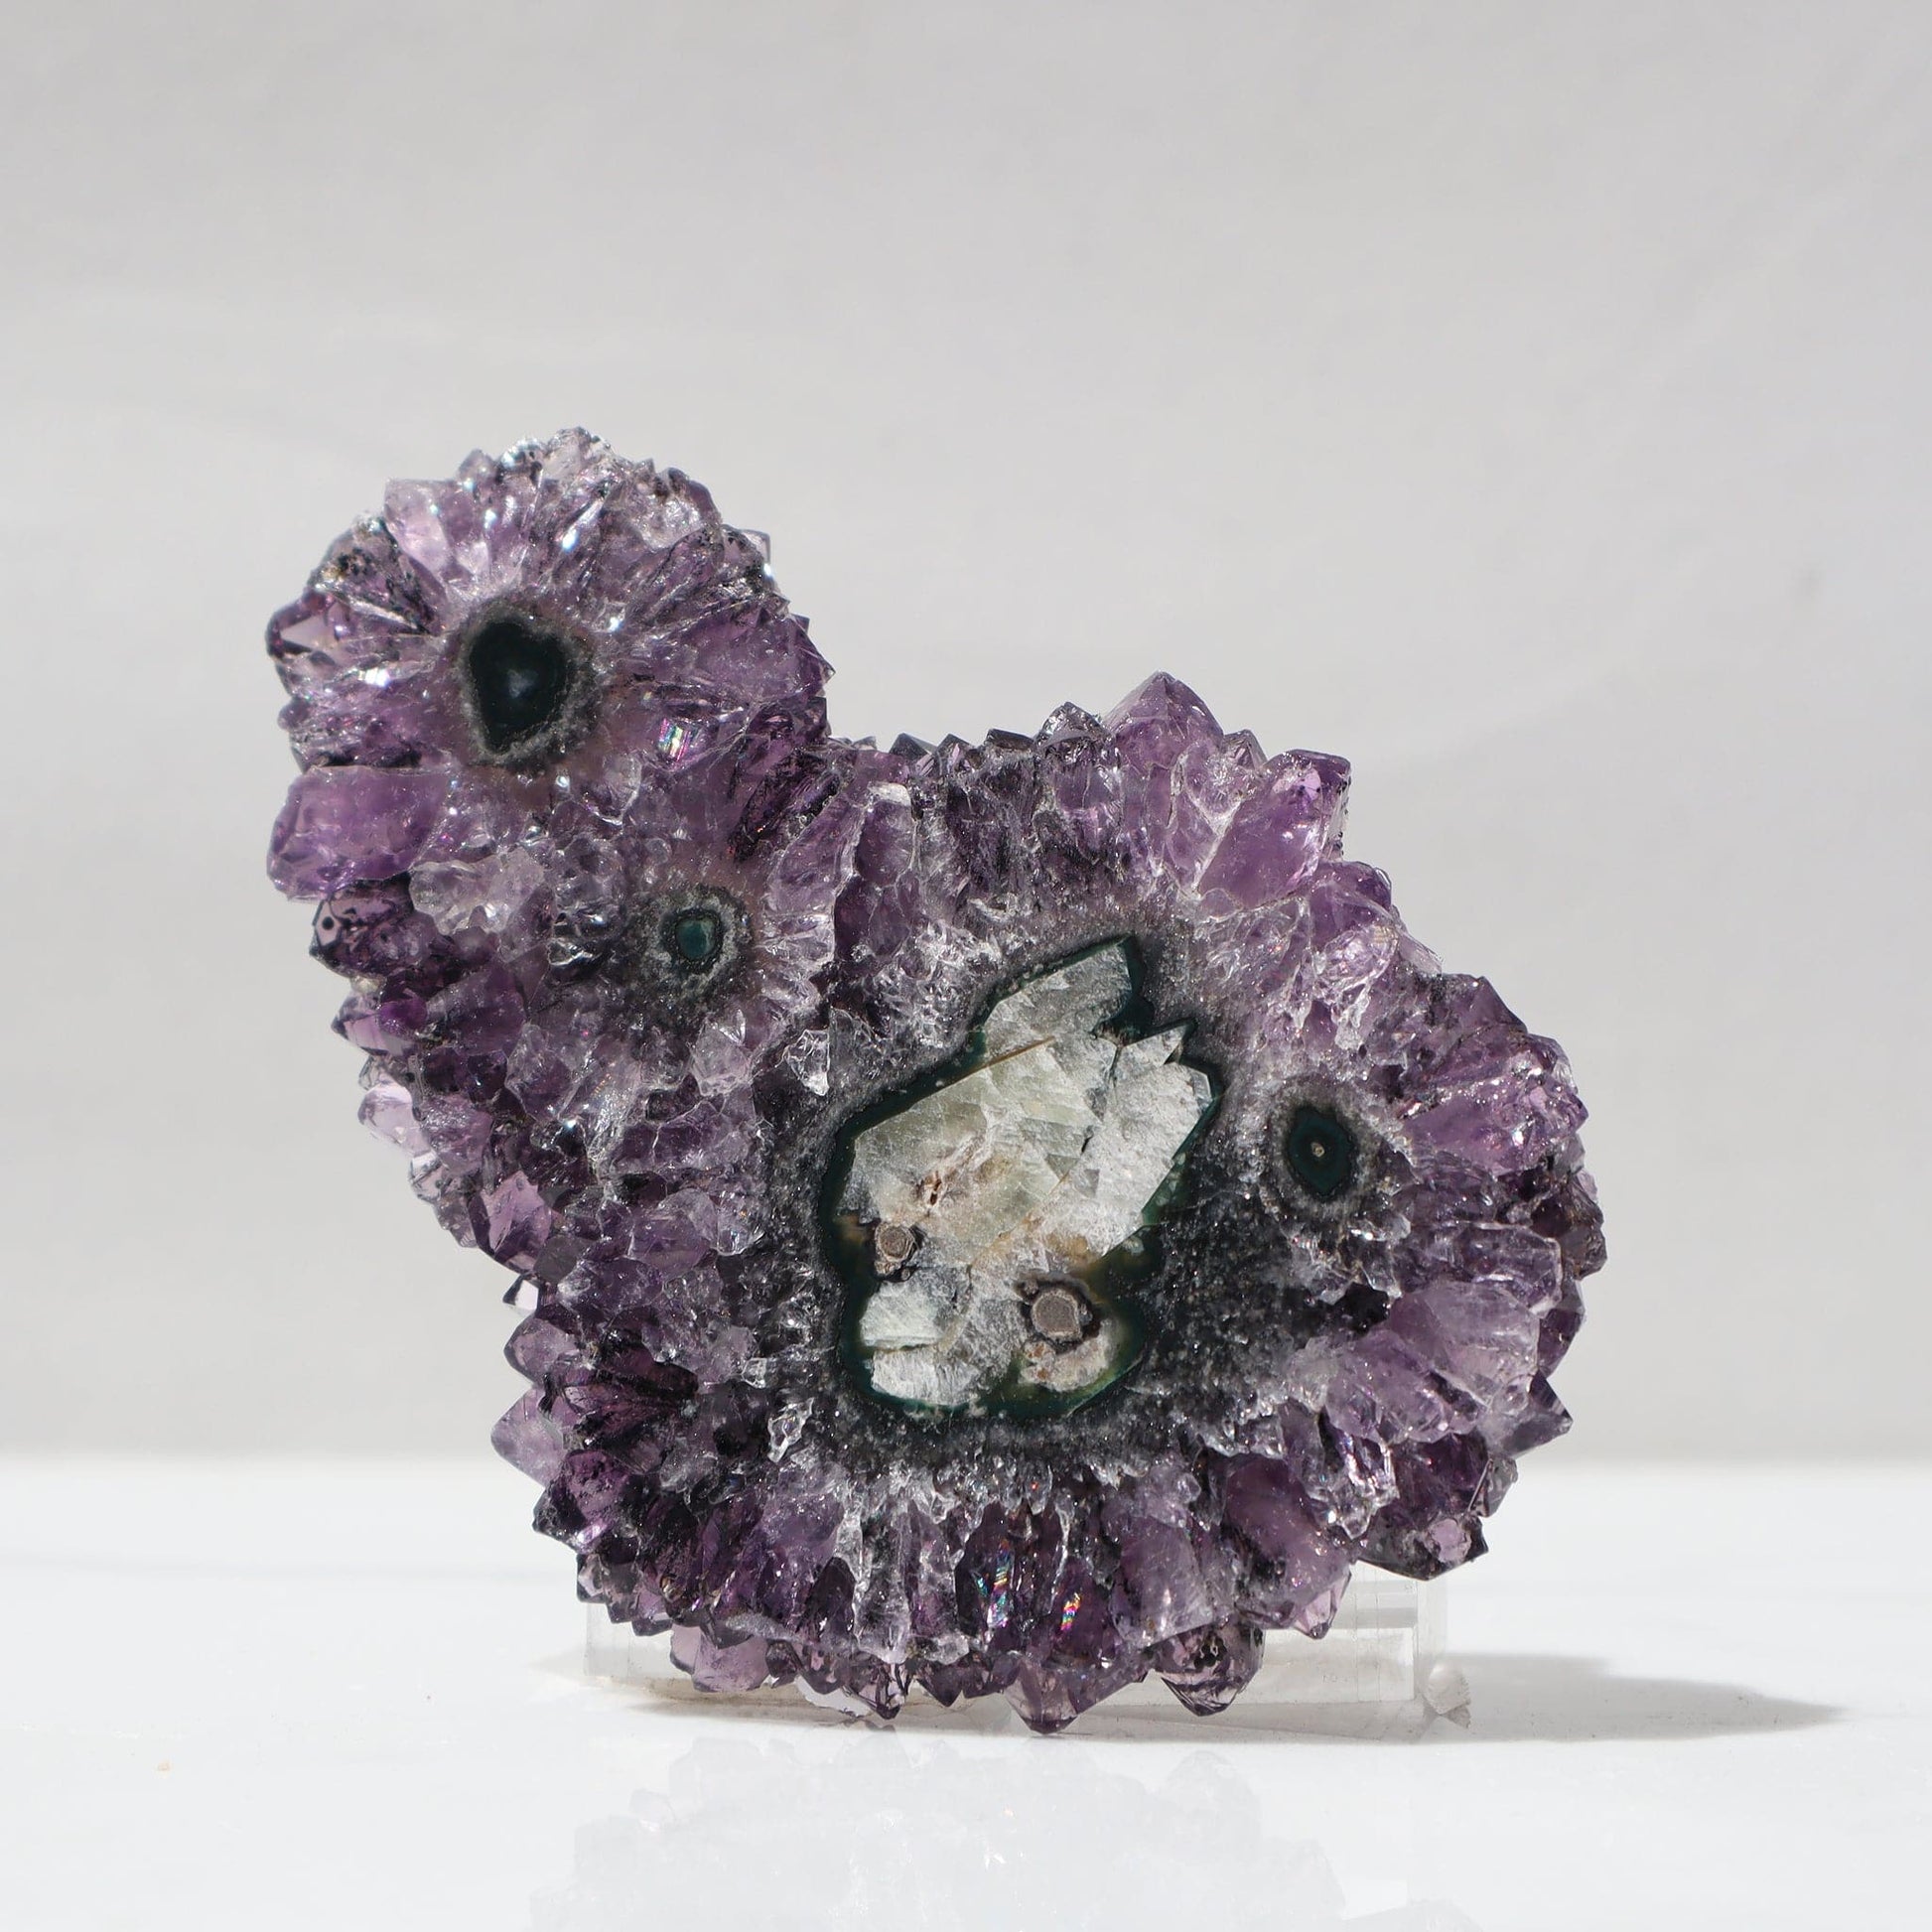 Rare in its mineral composition, this large stalactite slice of multiple stalactites in one, offers no trace of visible white quartz, instead, it displays saturated purple color crystals and dark green jasper,.